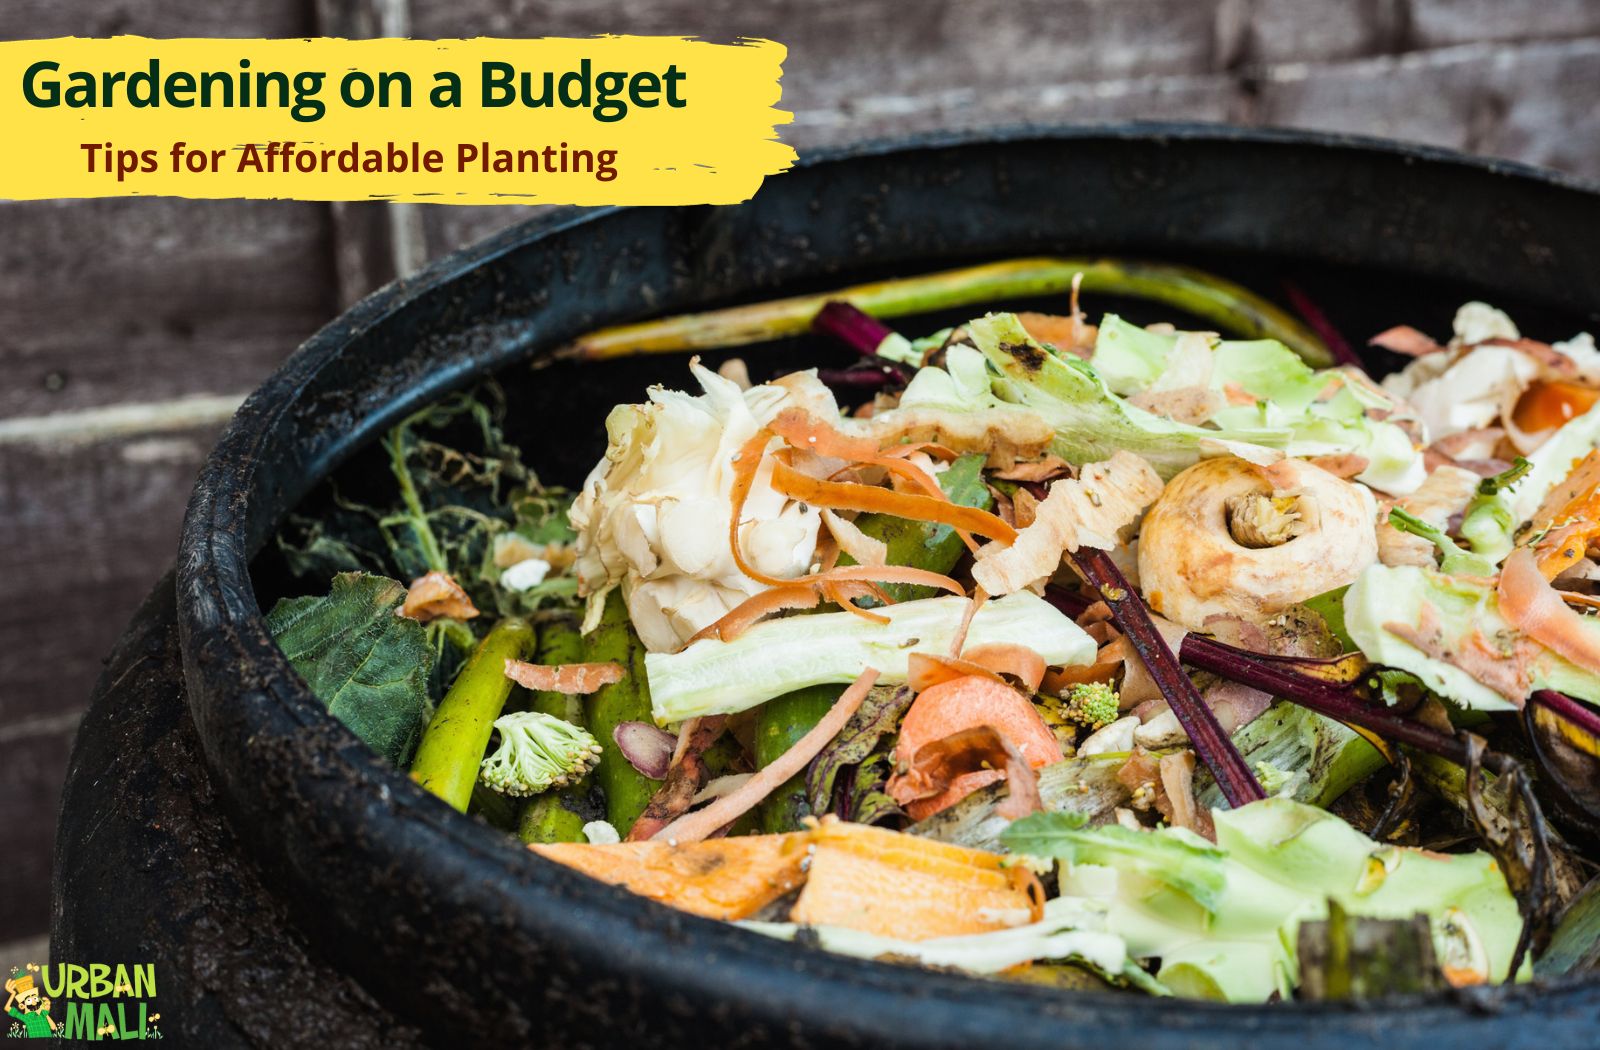 Gardening on a Budget: Tips for Affordable Planting